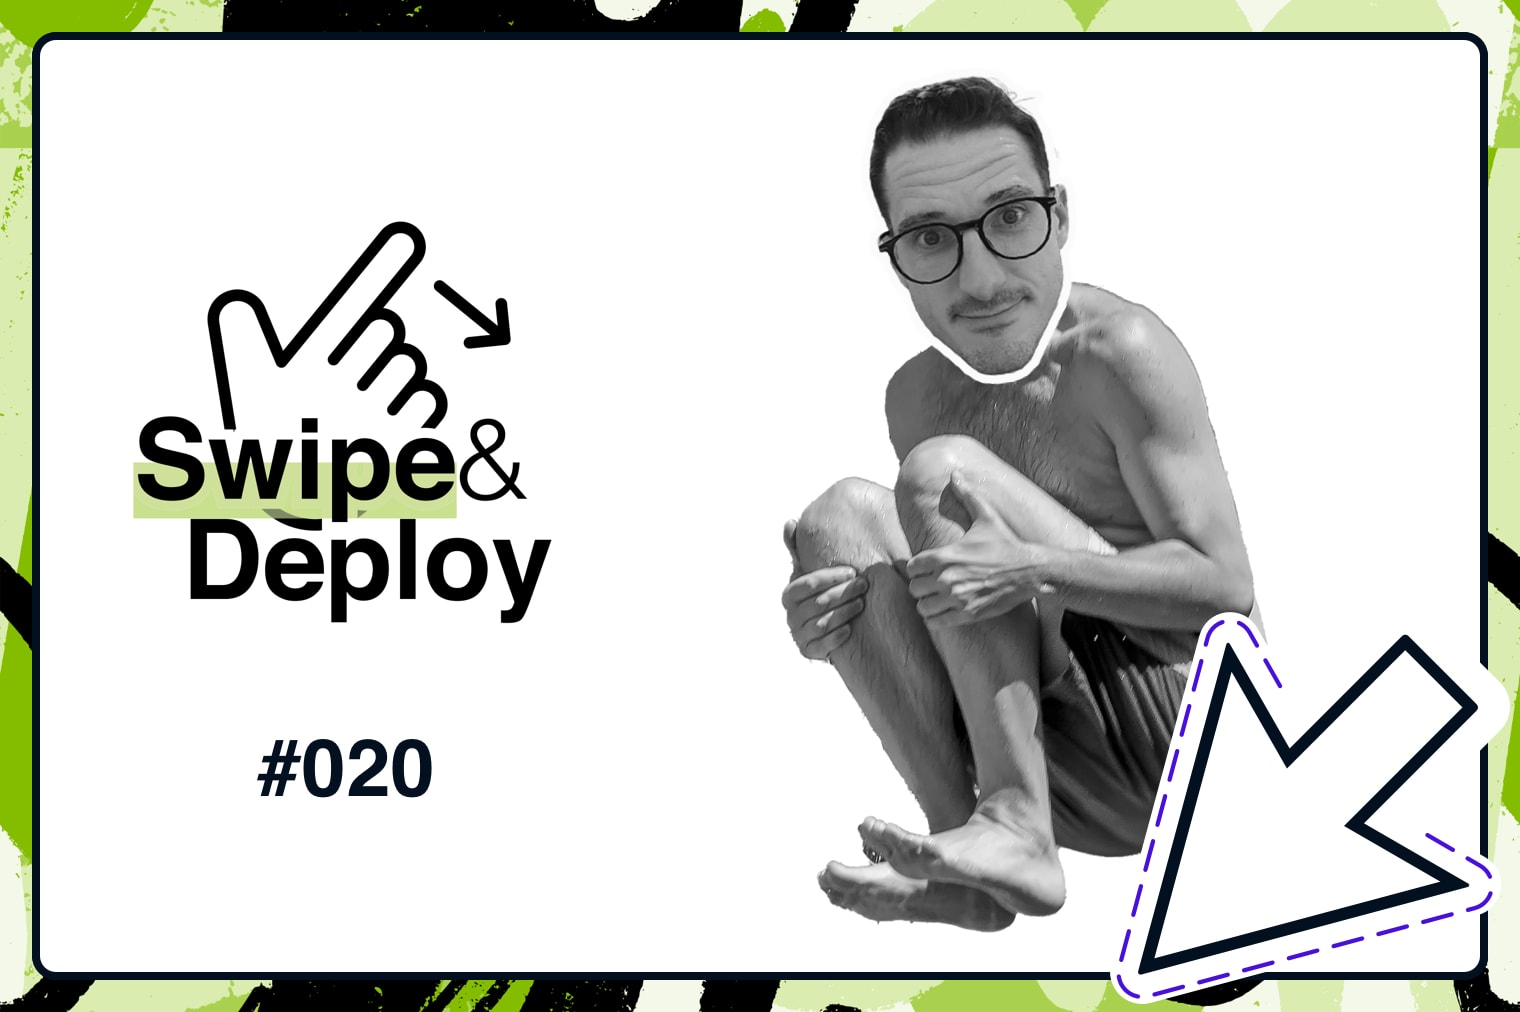 Swipe & Deploy 20 blog hero image of a man jumping into a pool.